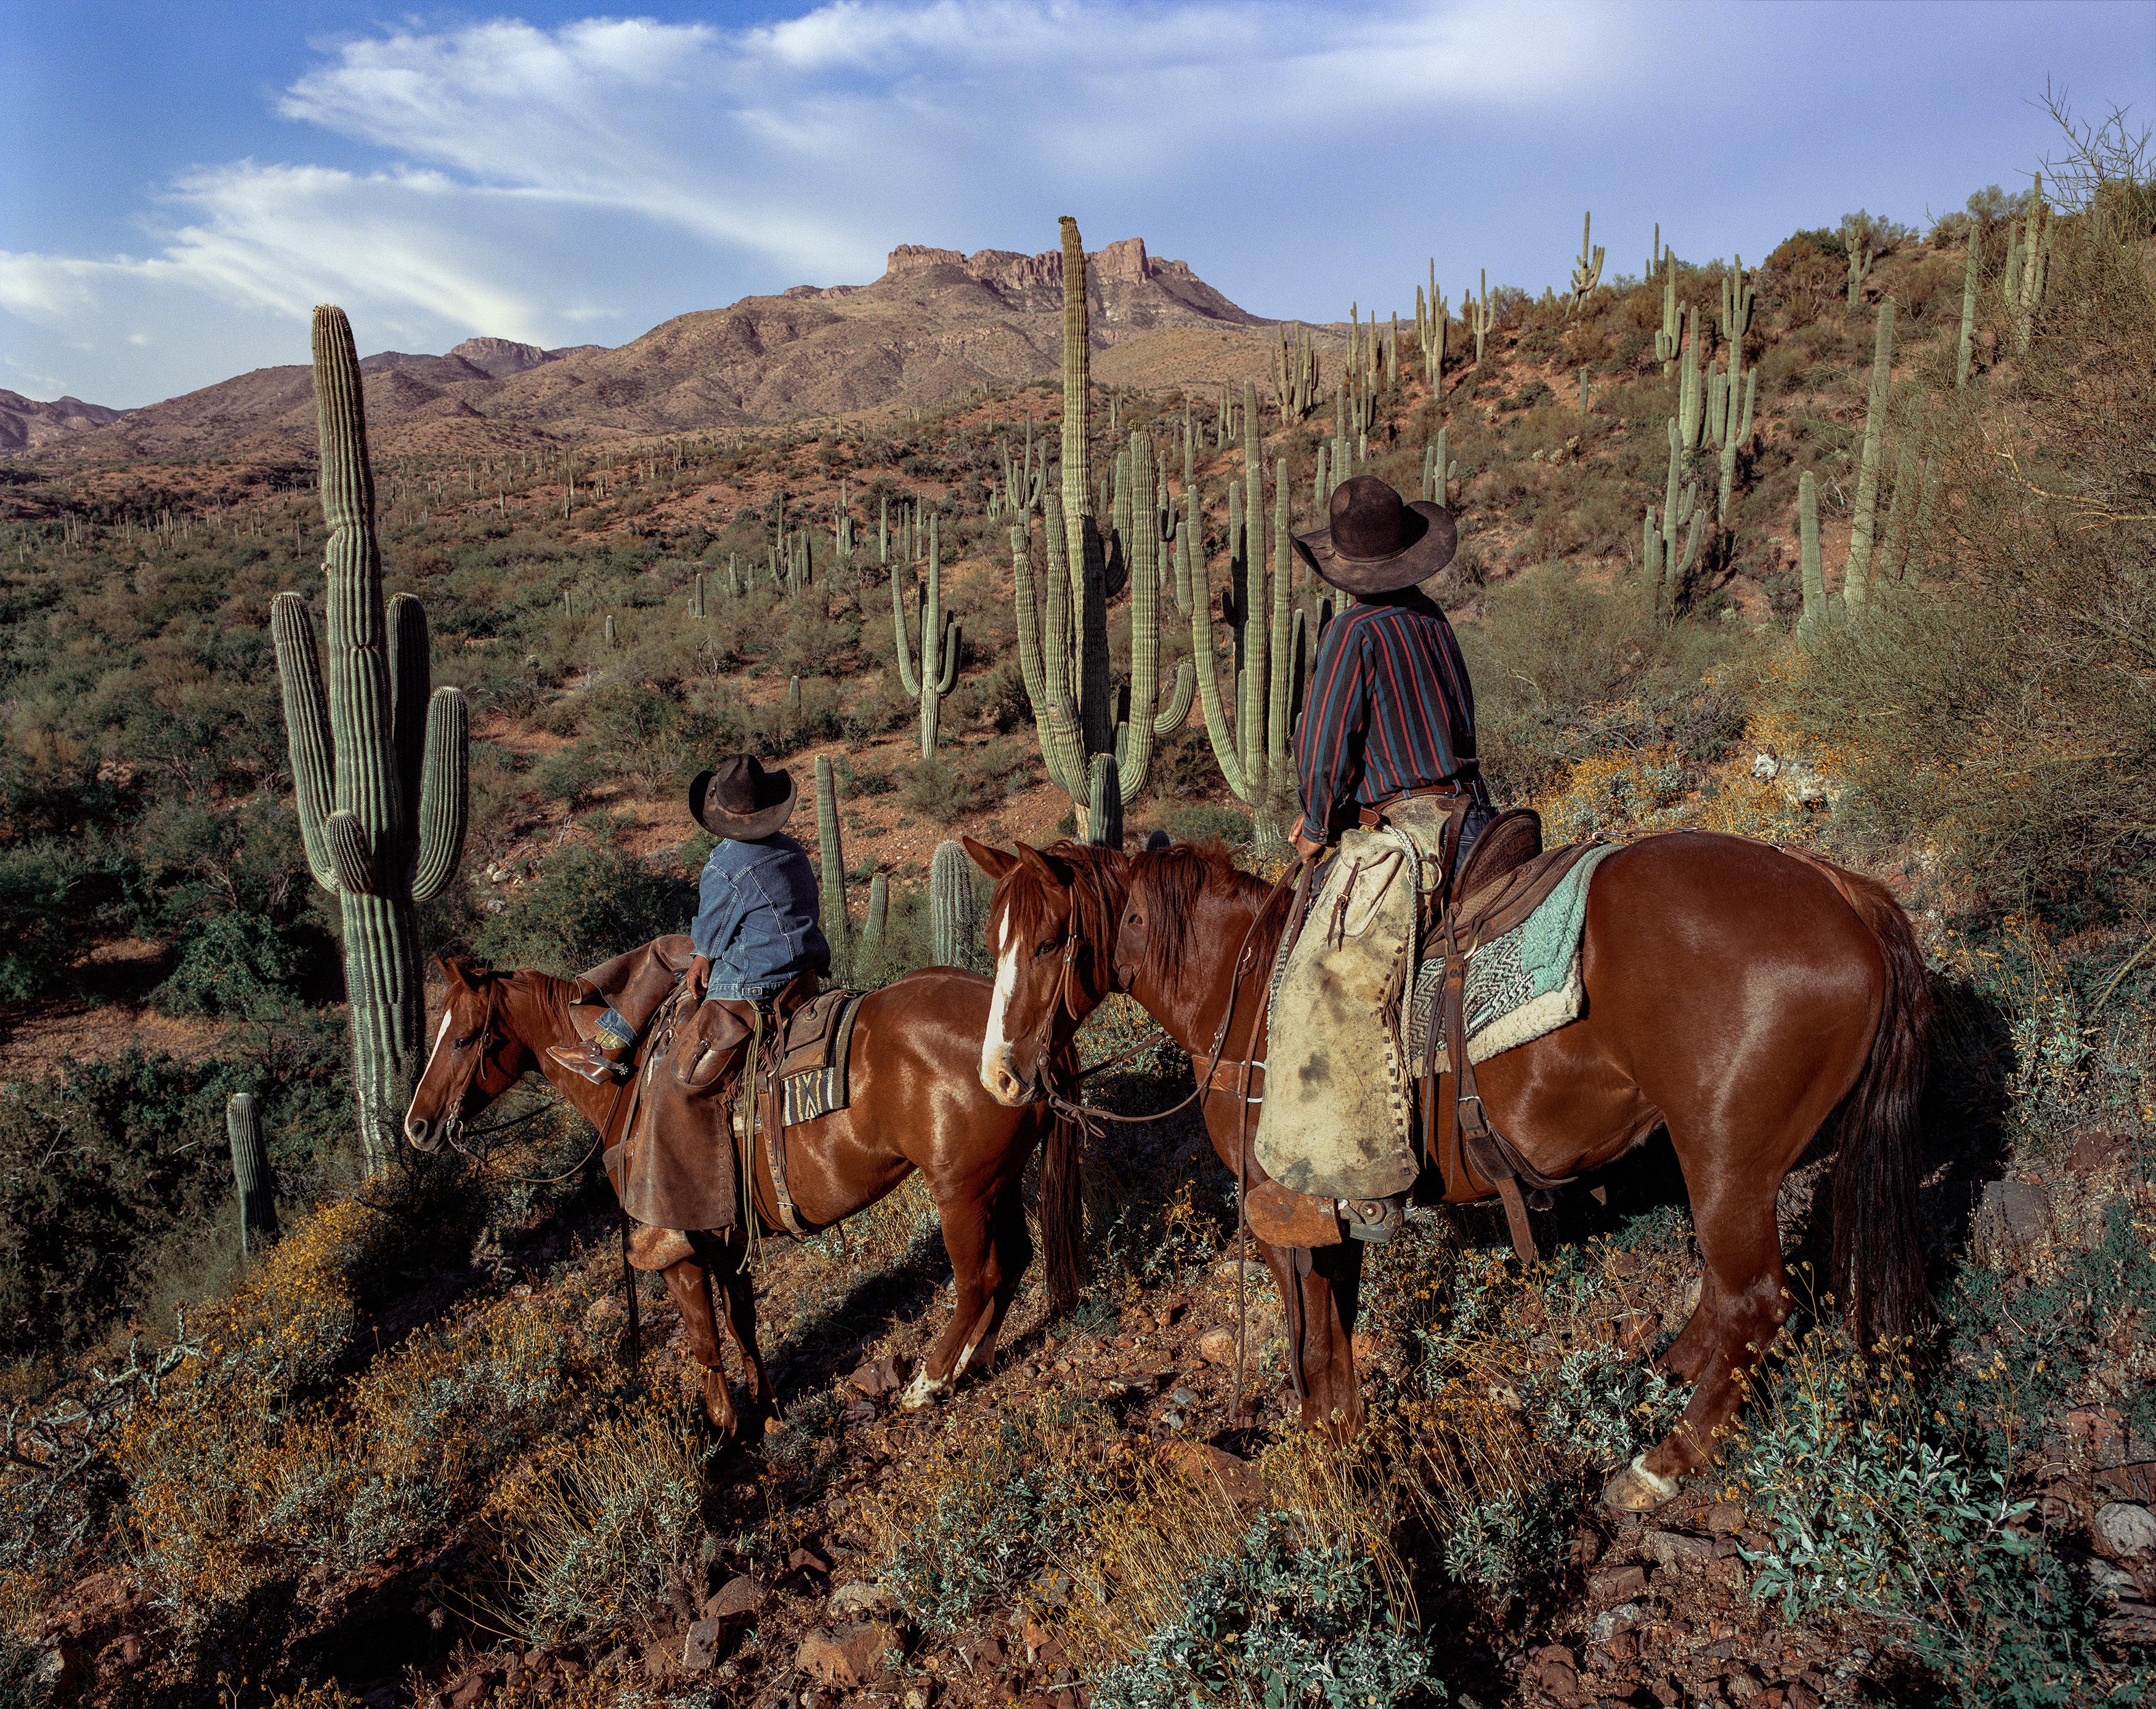 Series: The Western Collection
Archival Pigment Print
All available sizes without frame (with frame):
32" x 40"	(39" x 47")
48" x 60"	(55" x 67")
75" x 60"	(84" x 69")
Edition of 10 + 2 Artist Proof Total Across All Sizes

"Sonoran Glow" is a